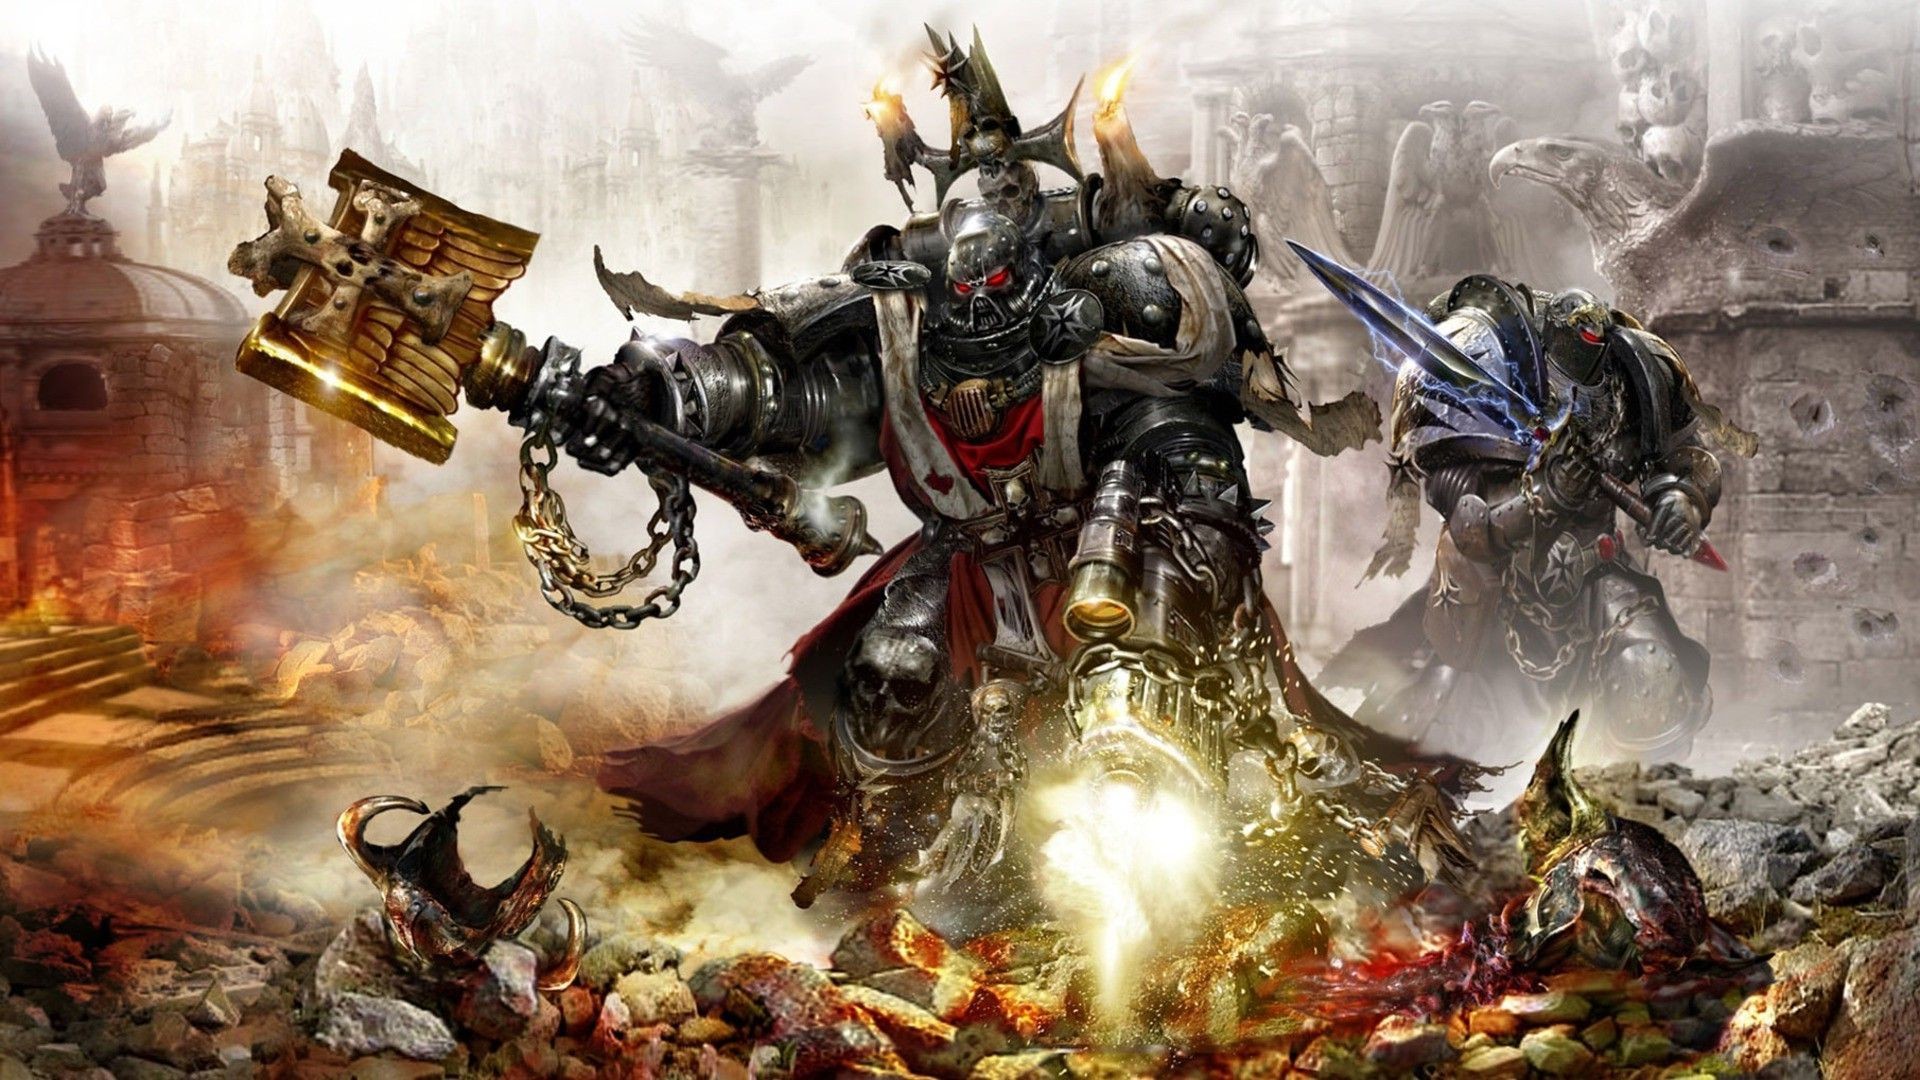 Download Warhammer 40K wallpapers for mobile phone free Warhammer 40K  HD pictures